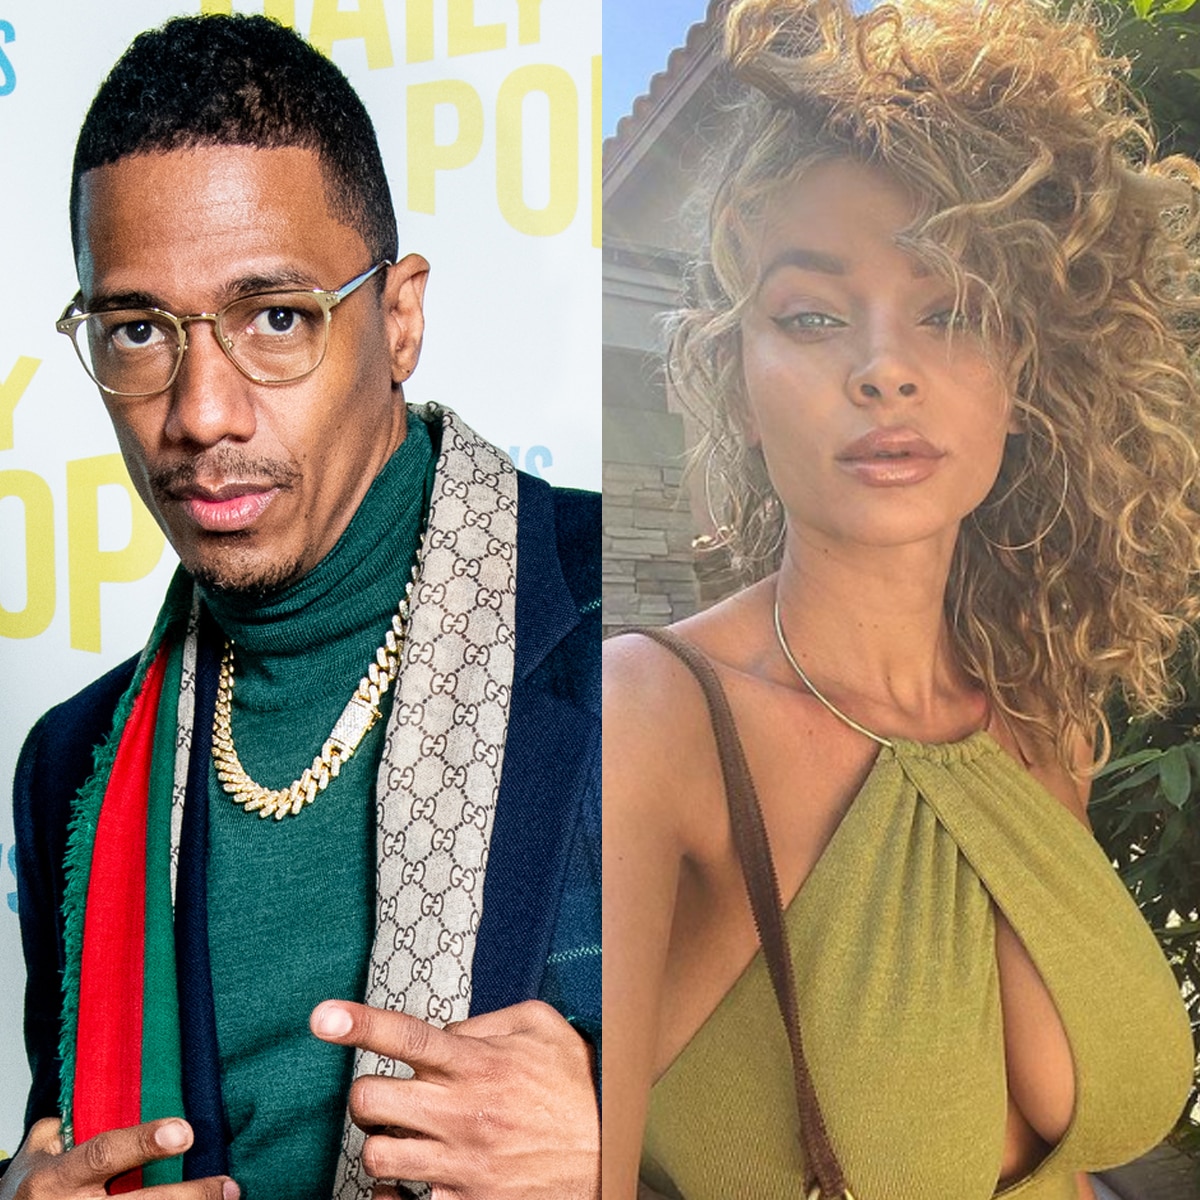 Nick Cannon 'shocked' by Mariah Carey's engagement news: 